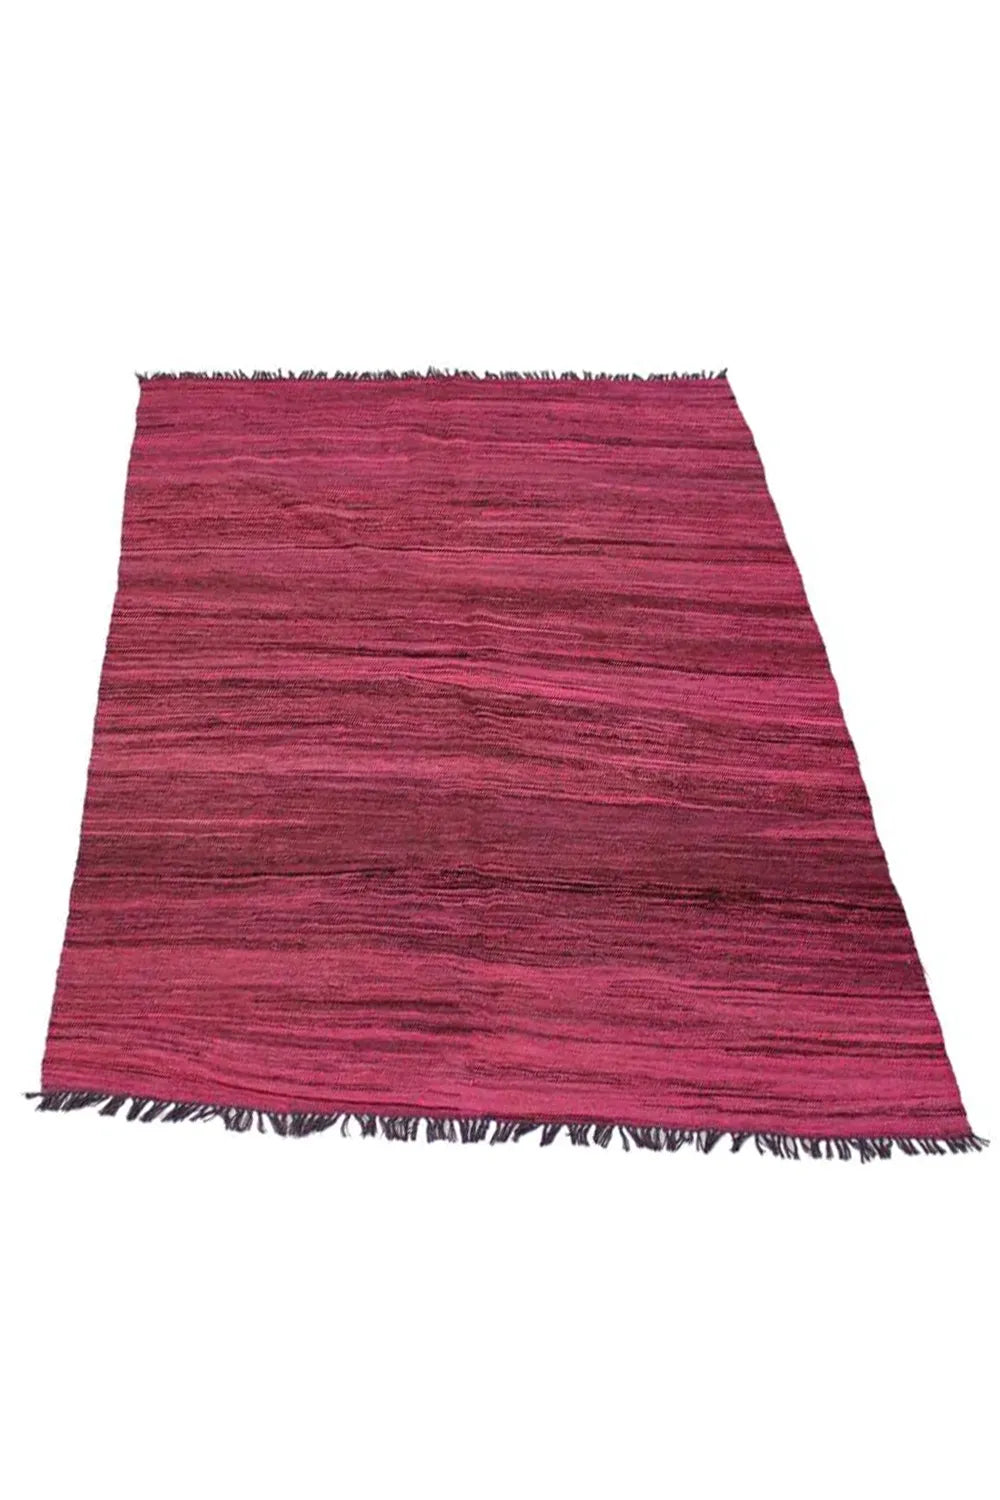 custom-sized pink flatweave wool rug, tailored for a perfect home accent